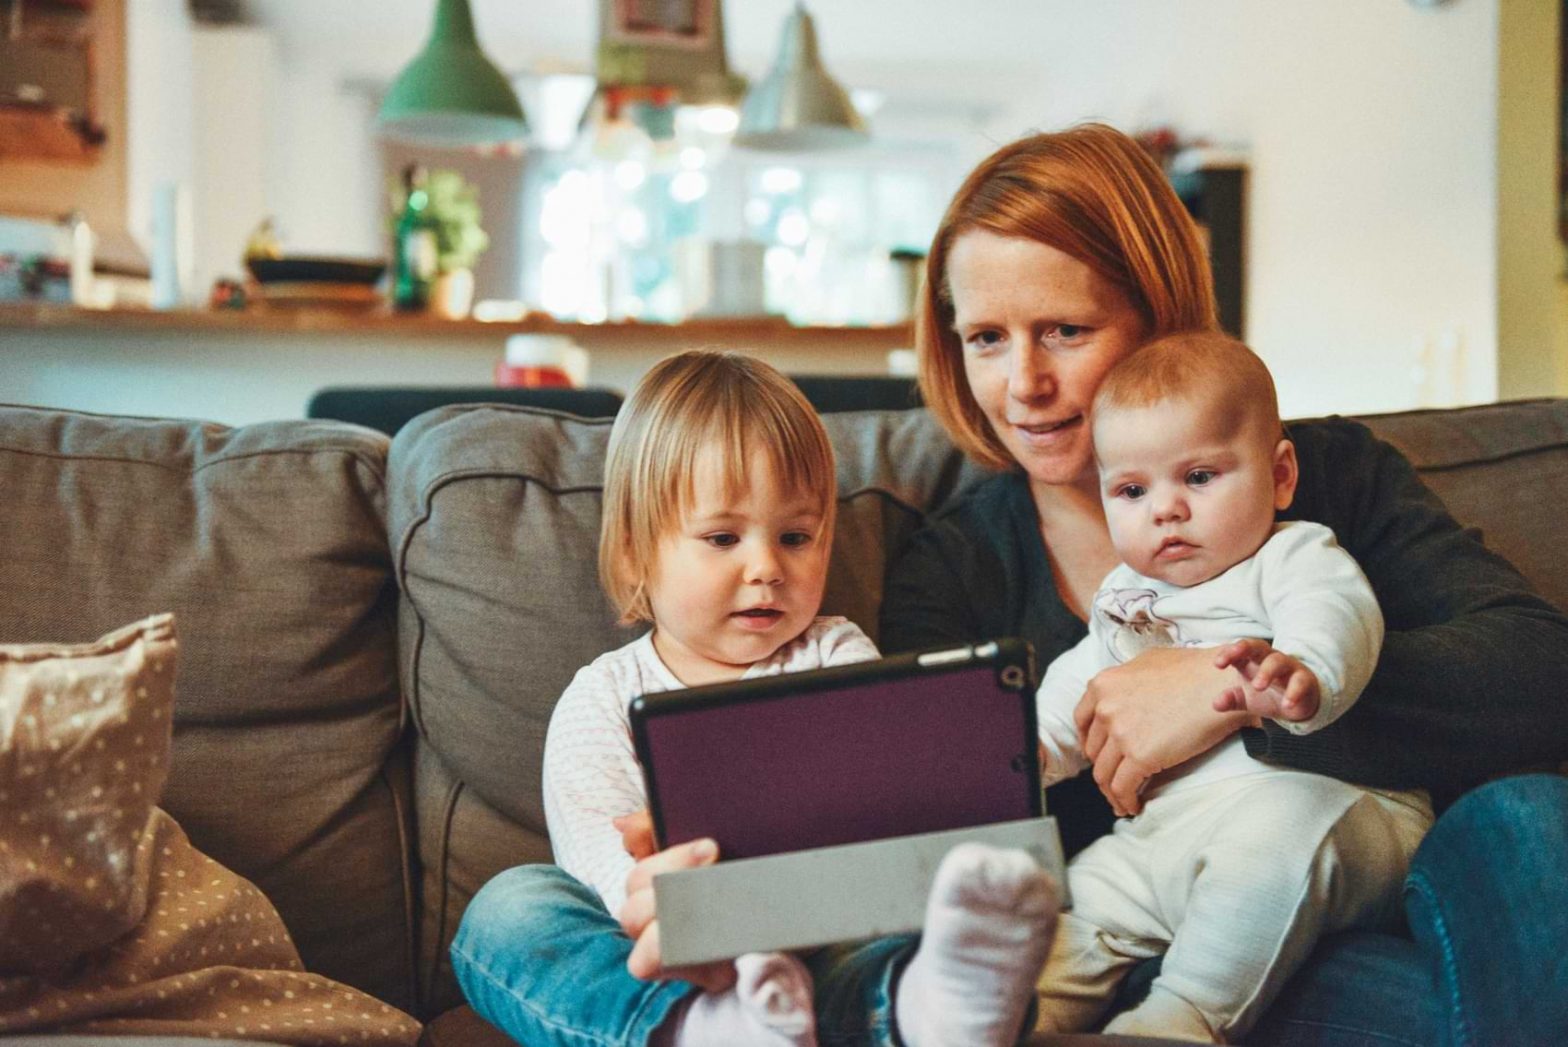 A mother and her two children sit together to watch TV on a tablet.